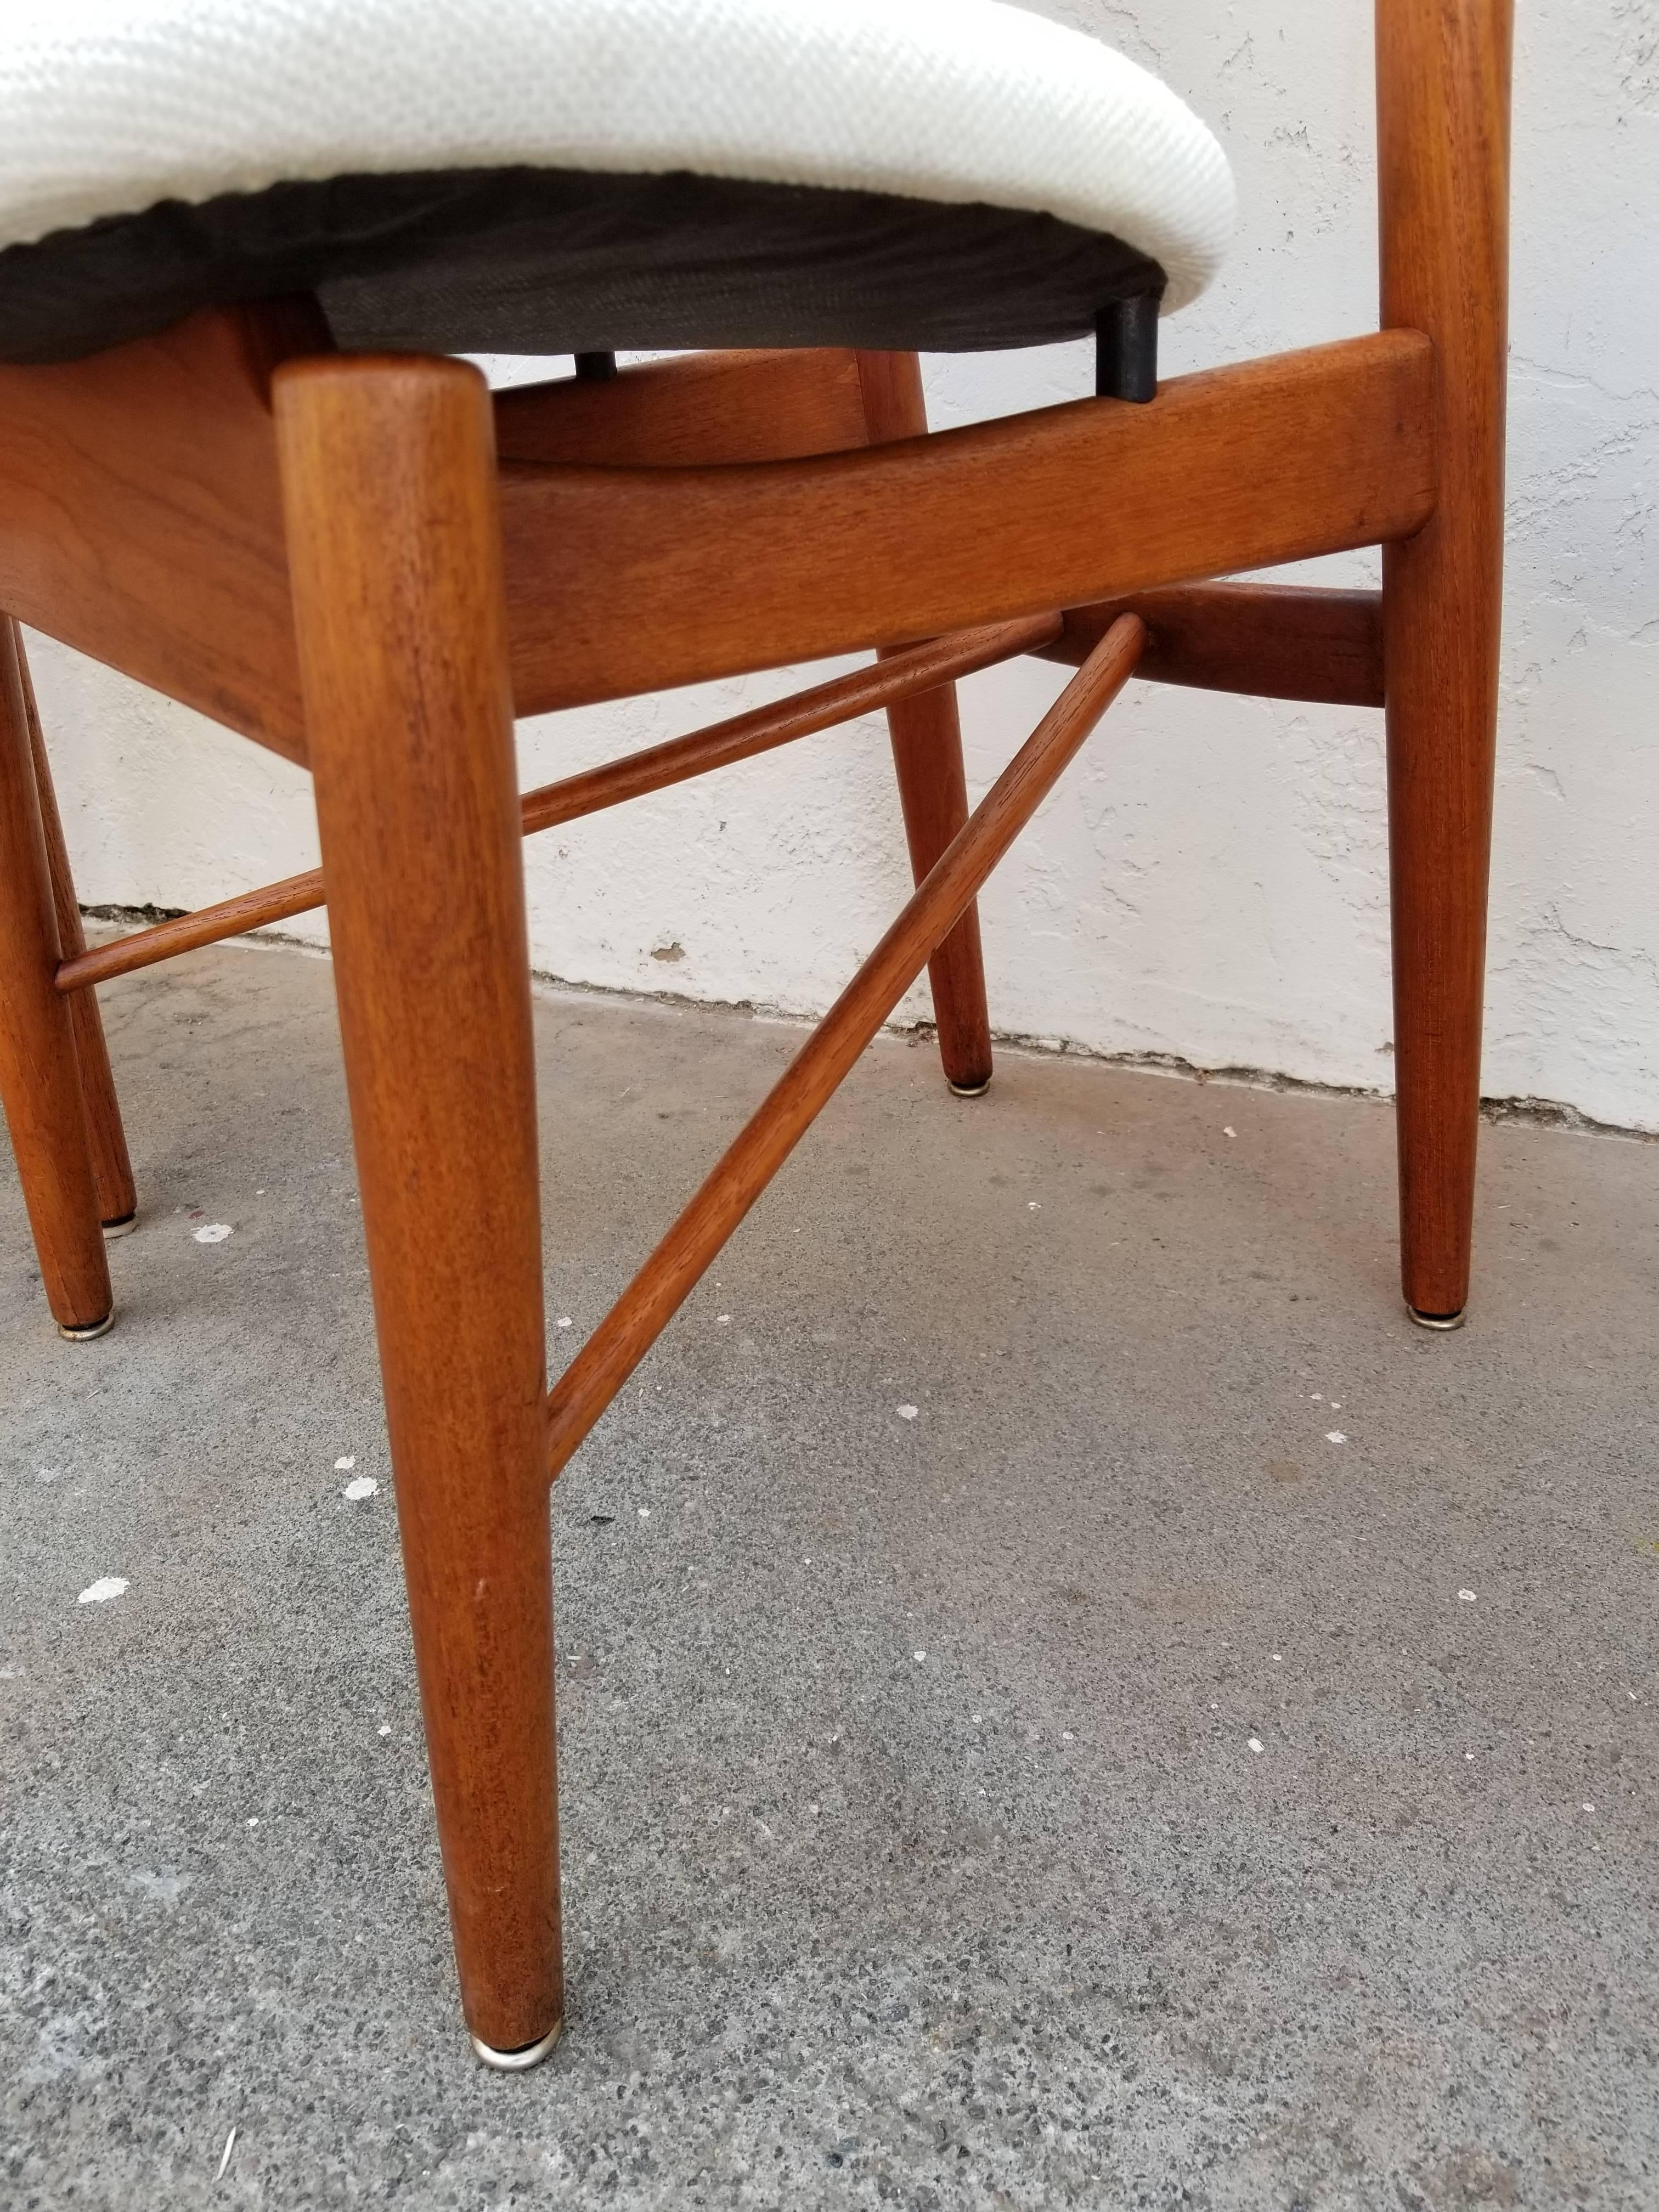 Finn Juhl Attributed Dining Chairs In Good Condition For Sale In Fulton, CA